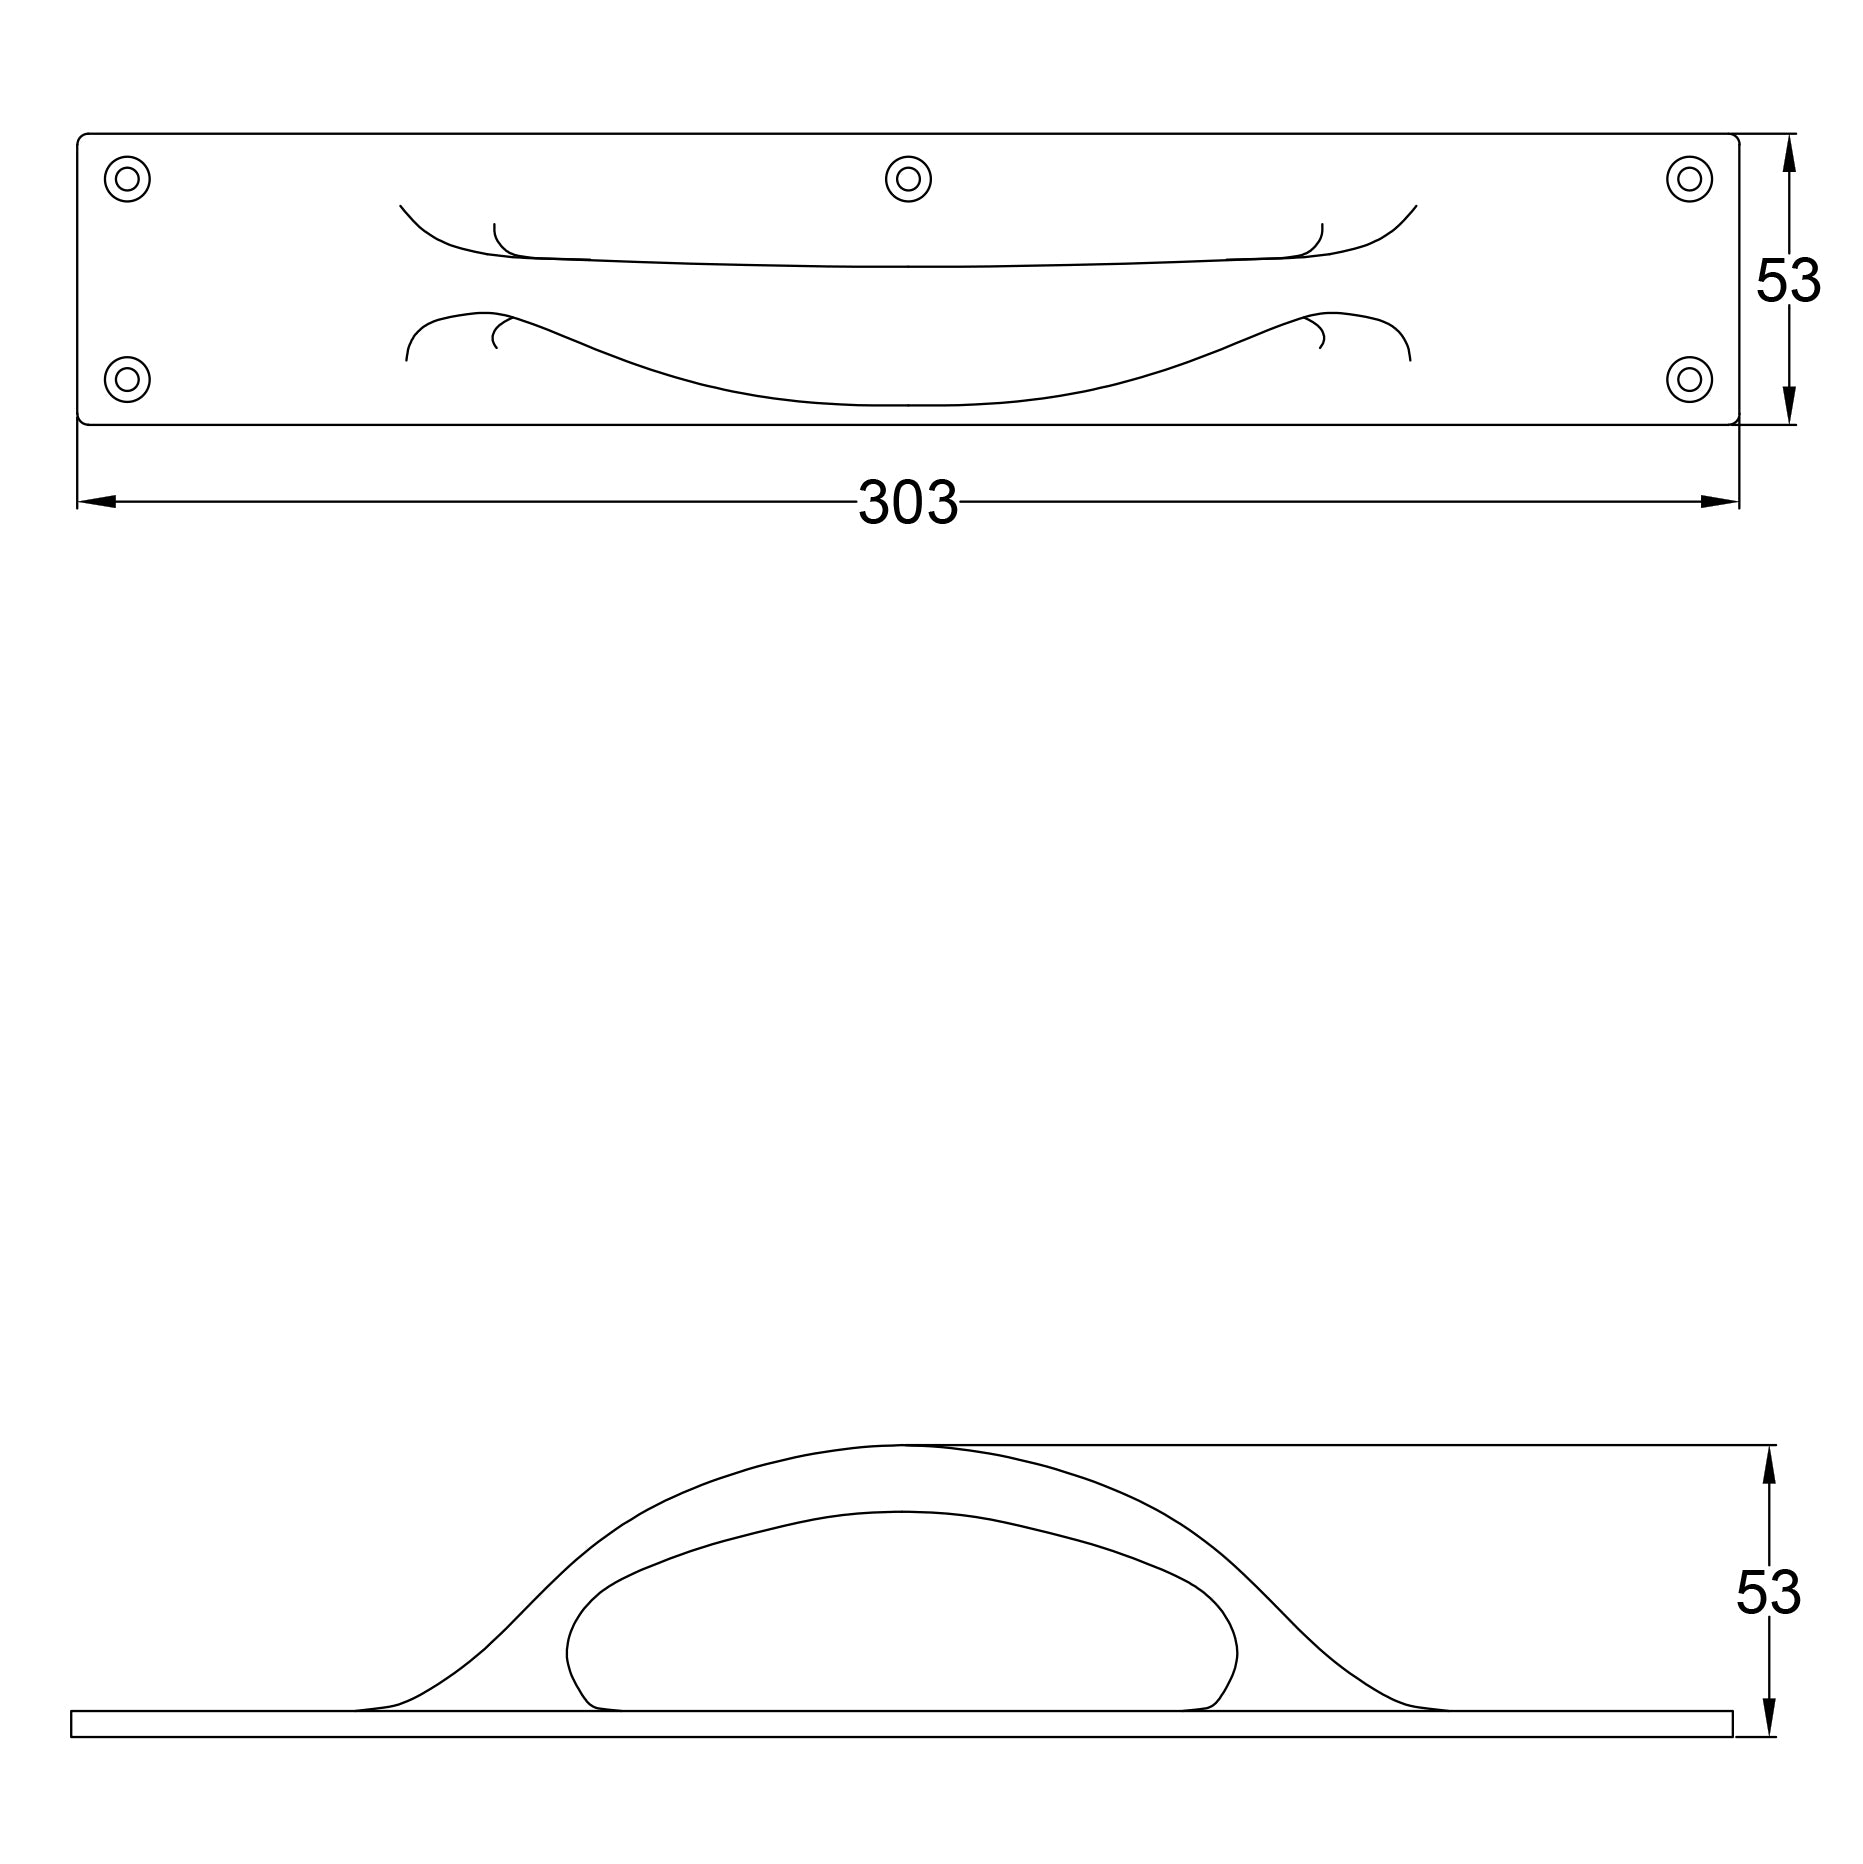 SHOW Technical Drawing of Door Pull Handle on Low Profile Back Plate